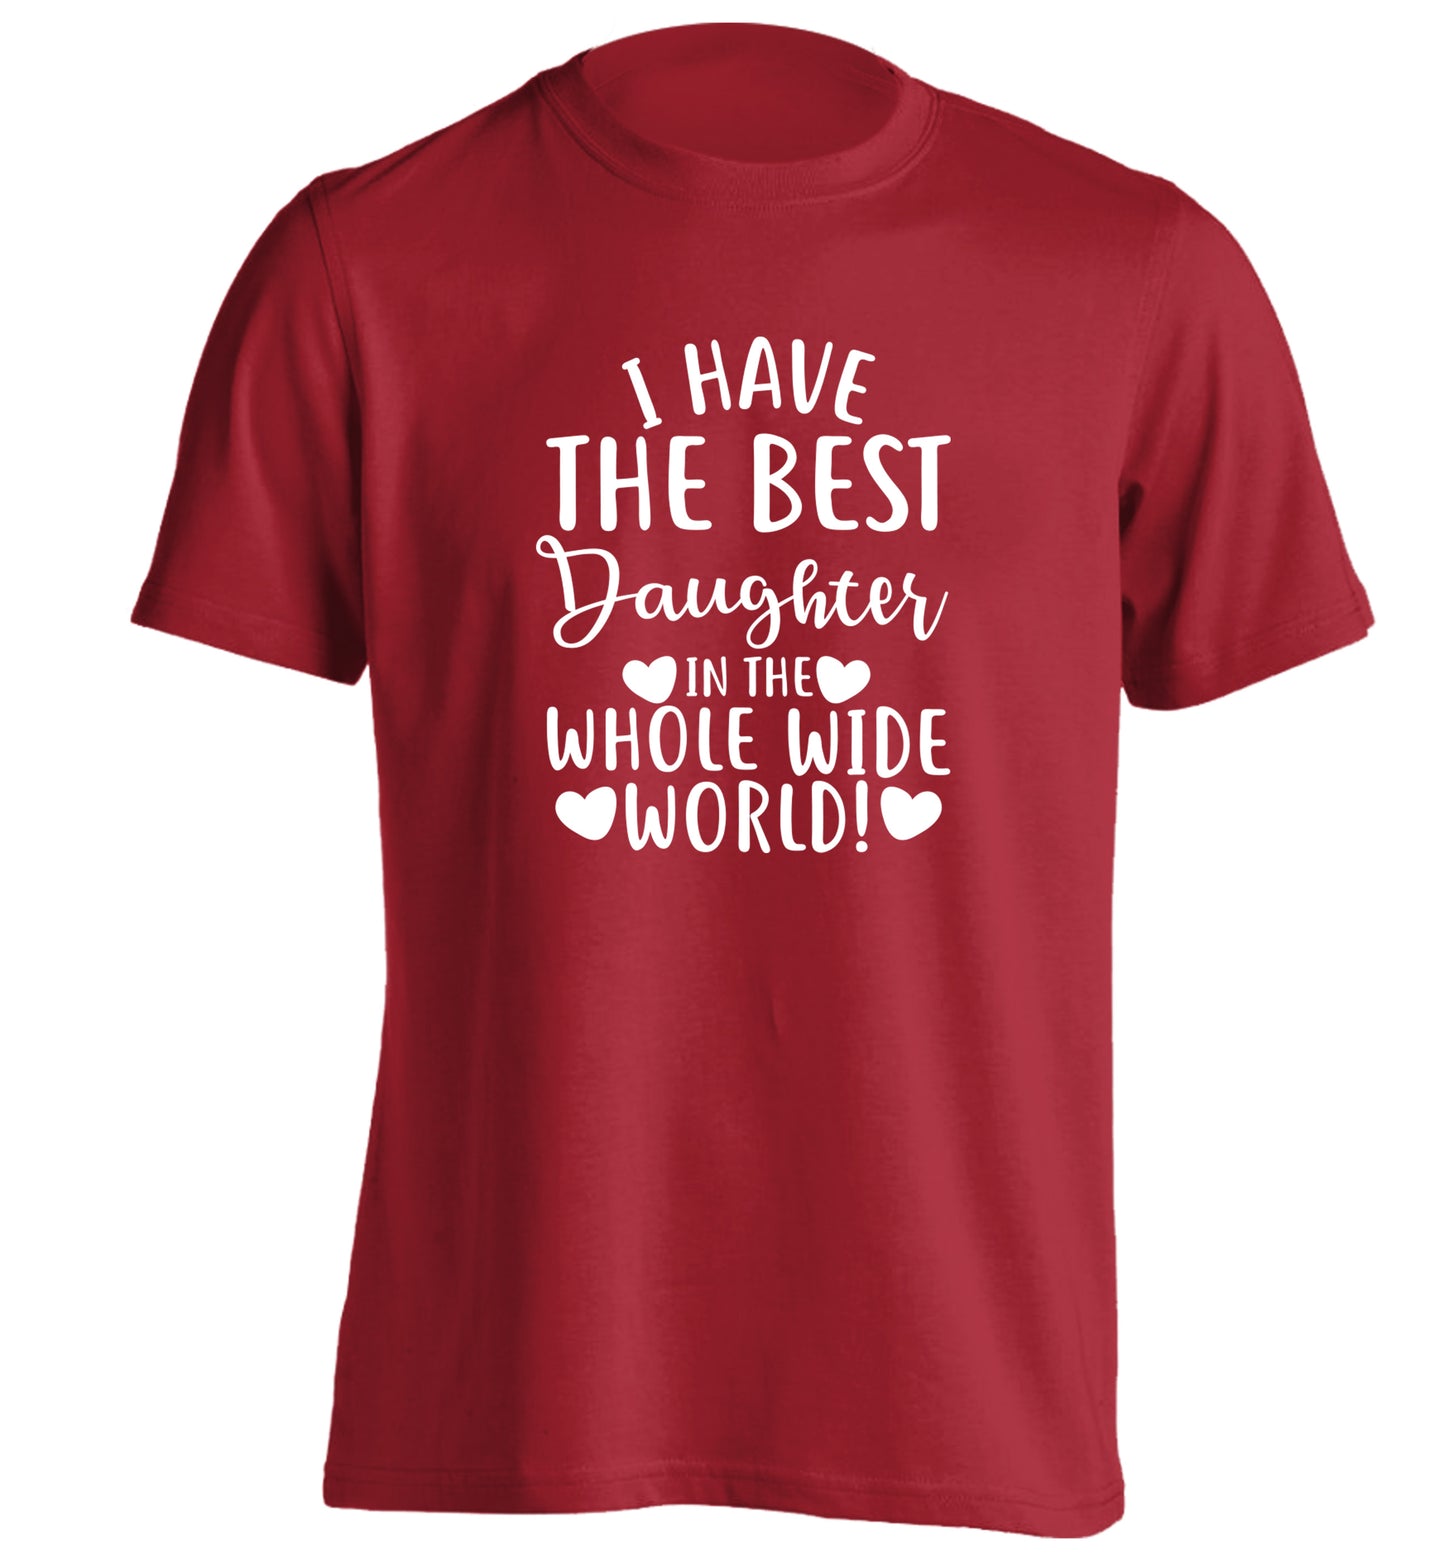 I have the best daughter in the whole wide world! adults unisex red Tshirt 2XL